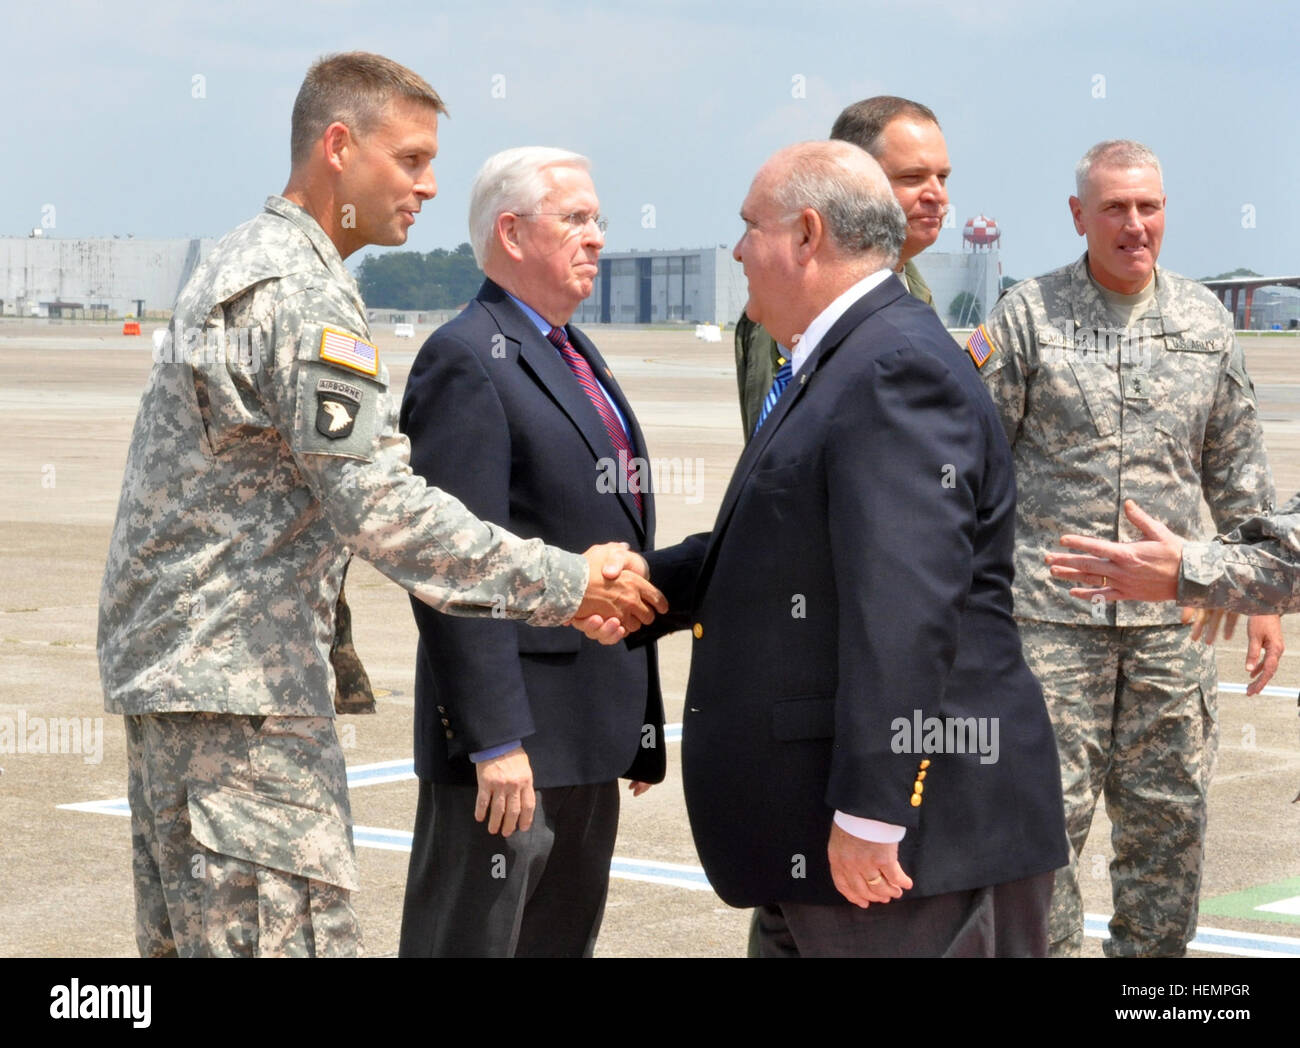 Under Secretary of the U.S. Army Dr. Joseph W. Westphal shakes hands with Col. Thomas Tickner, commander of the U.S. Army Corps of Engineers Savannah District, upon arriving at Hunter Army Airfield, Sept. 4, 2013. Tickner and his staff briefed the Undersecretary on the Savannah Harbor Expansion Project, followed by a press conference and tour at the Savannah Port. USACE photo by Billy Birdwell. Army Under Secretary visits Savannah 130904-A-JH002-001 Stock Photo